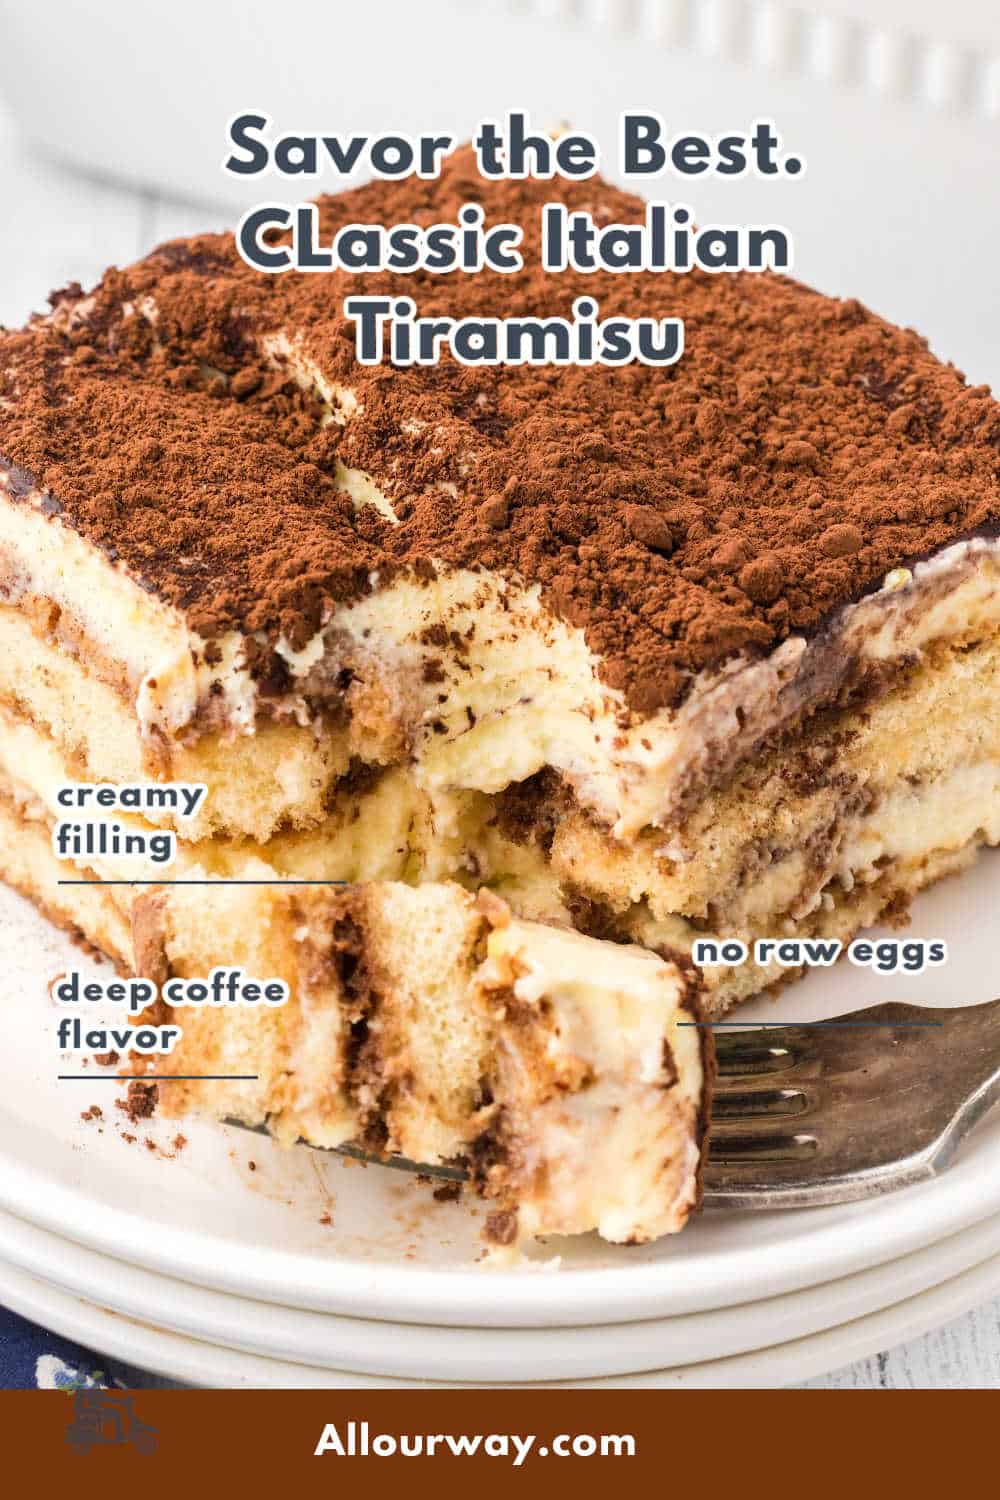 This decadent Italian Tiramisu recipe is made without raw eggs, so there's no need to worry. So get ready to indulge in absolute perfection. Our luxurious Classic Tiramisu recipe has been flawlessly crafted using gentle cooking techniques, resulting in an unforgettable dessert experience.